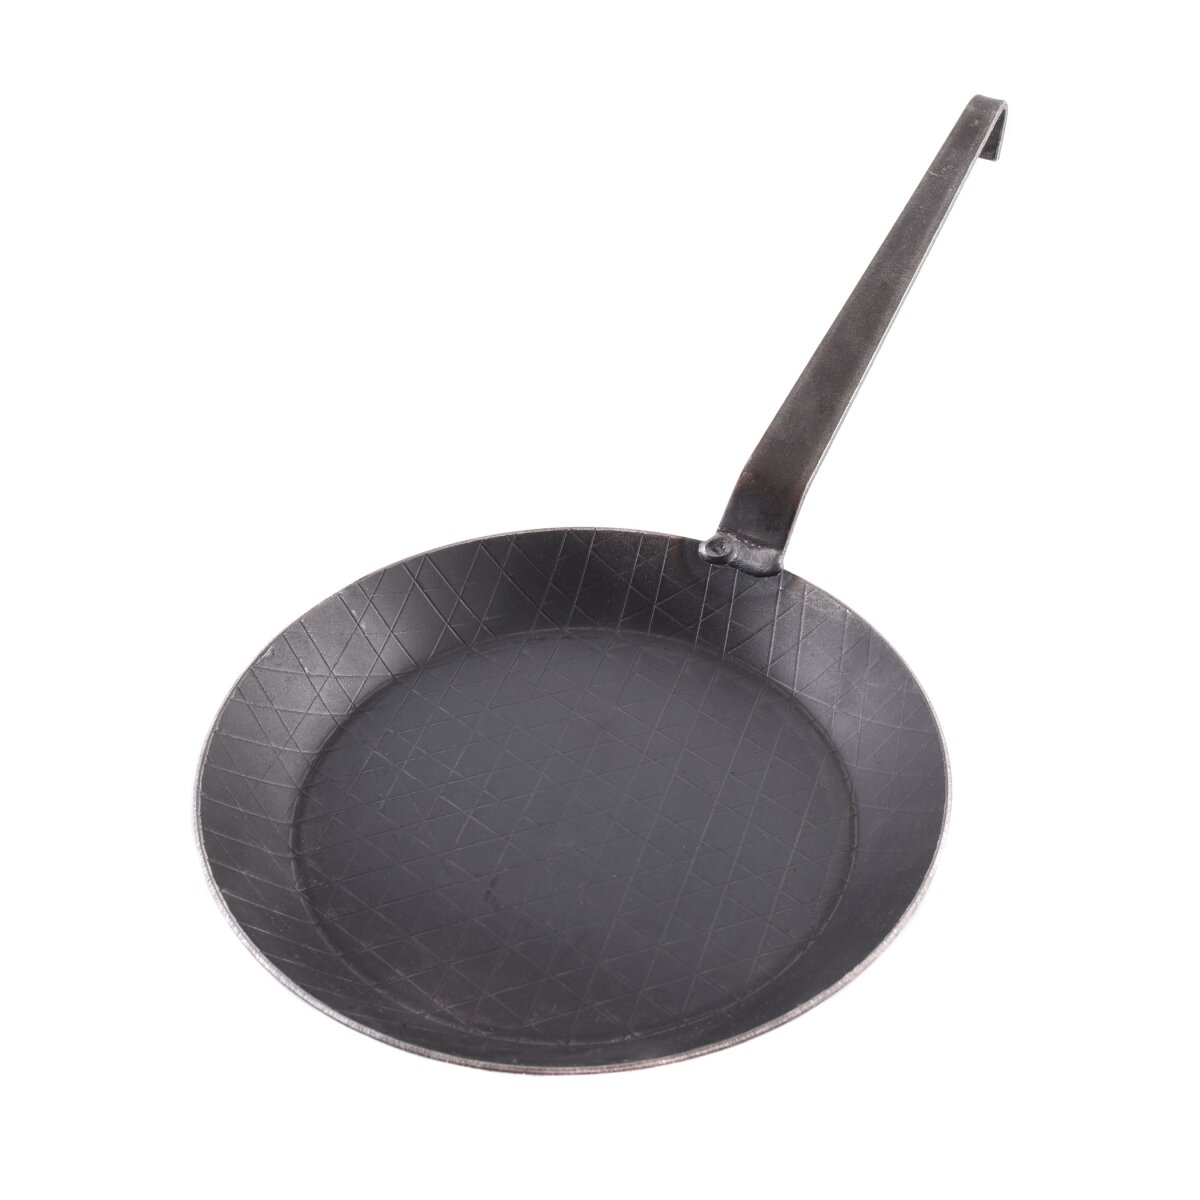 Frying pan with forged hook handle, approx. 24 cm